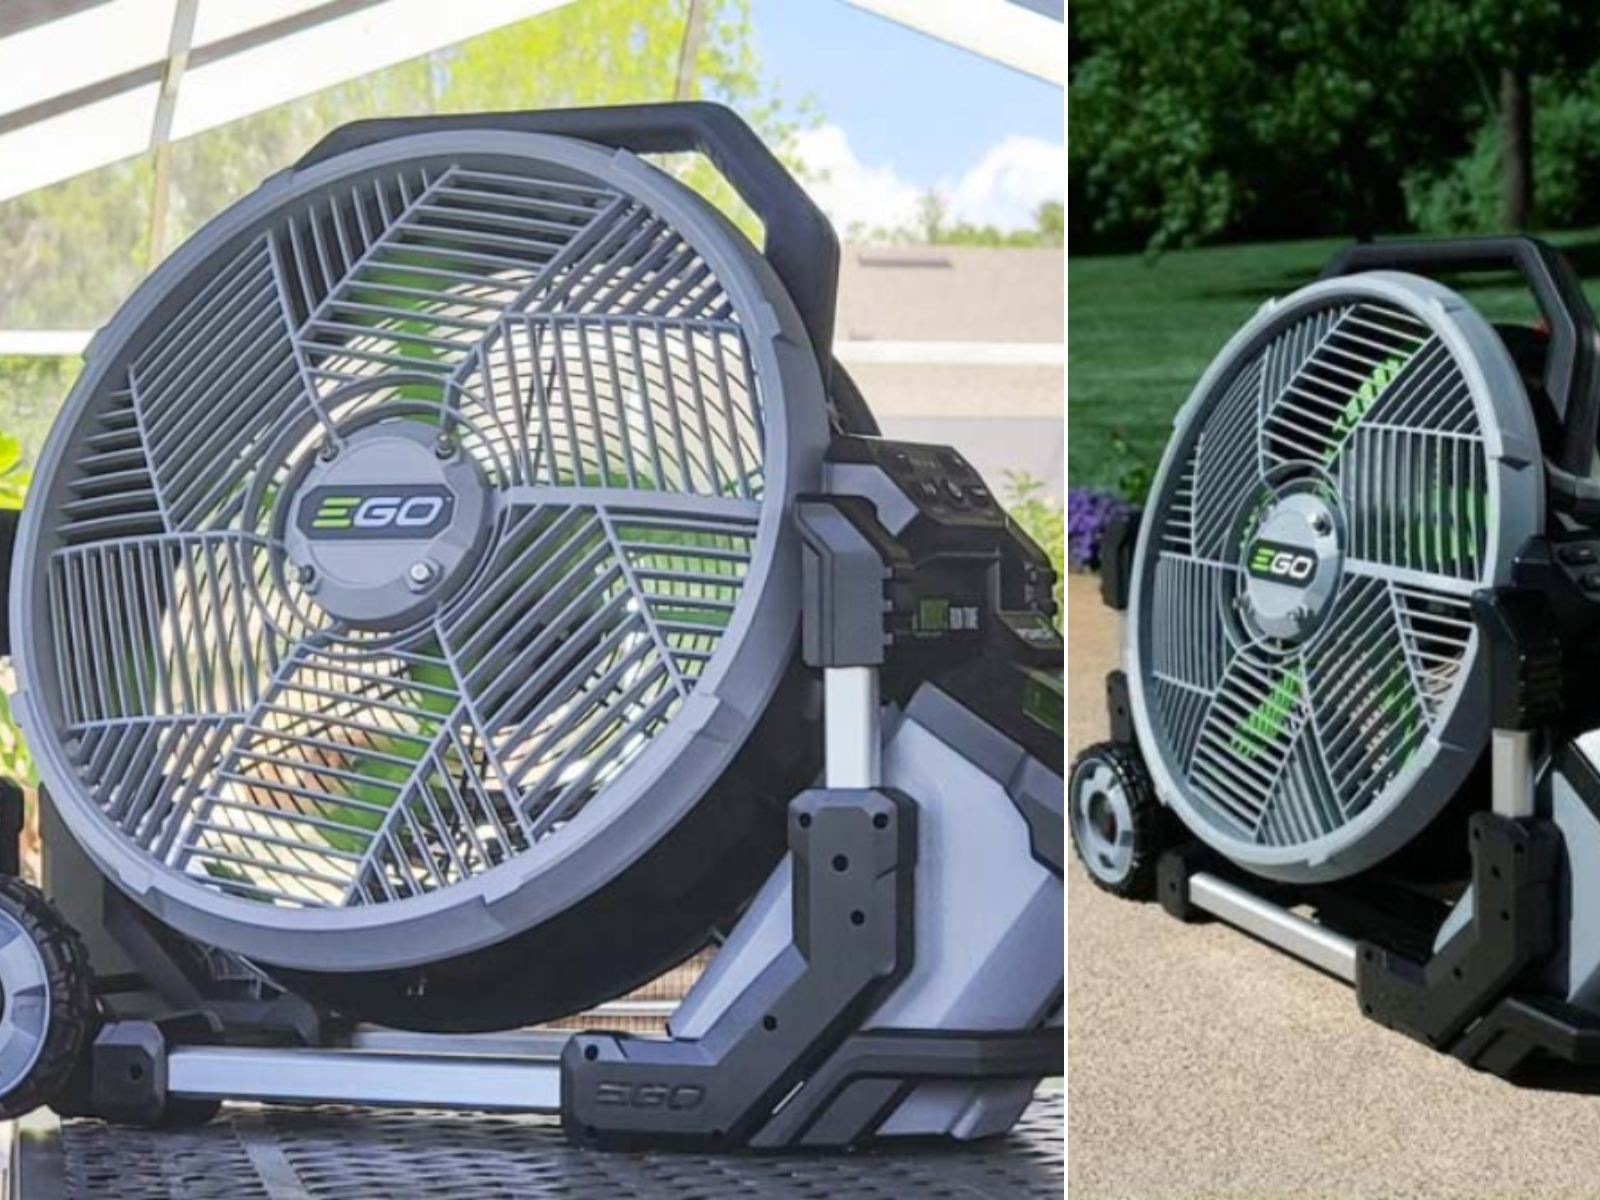 An EGO turbo fan with misting sitting on a table in a greenhouse and outside on a concrete porch.